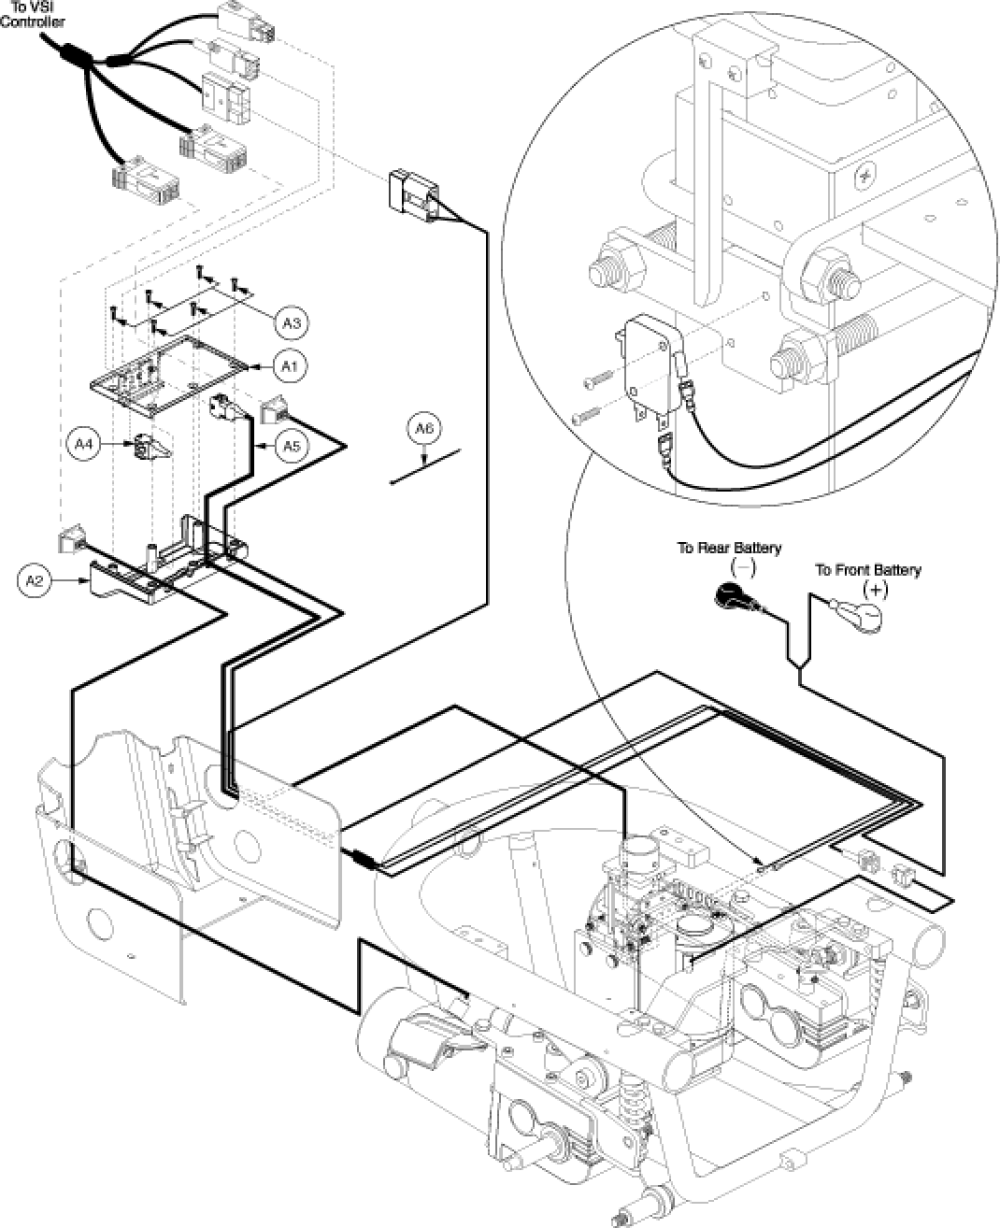 Electronics Tray Assembly - Vsi, Power Seat , Off-board parts diagram